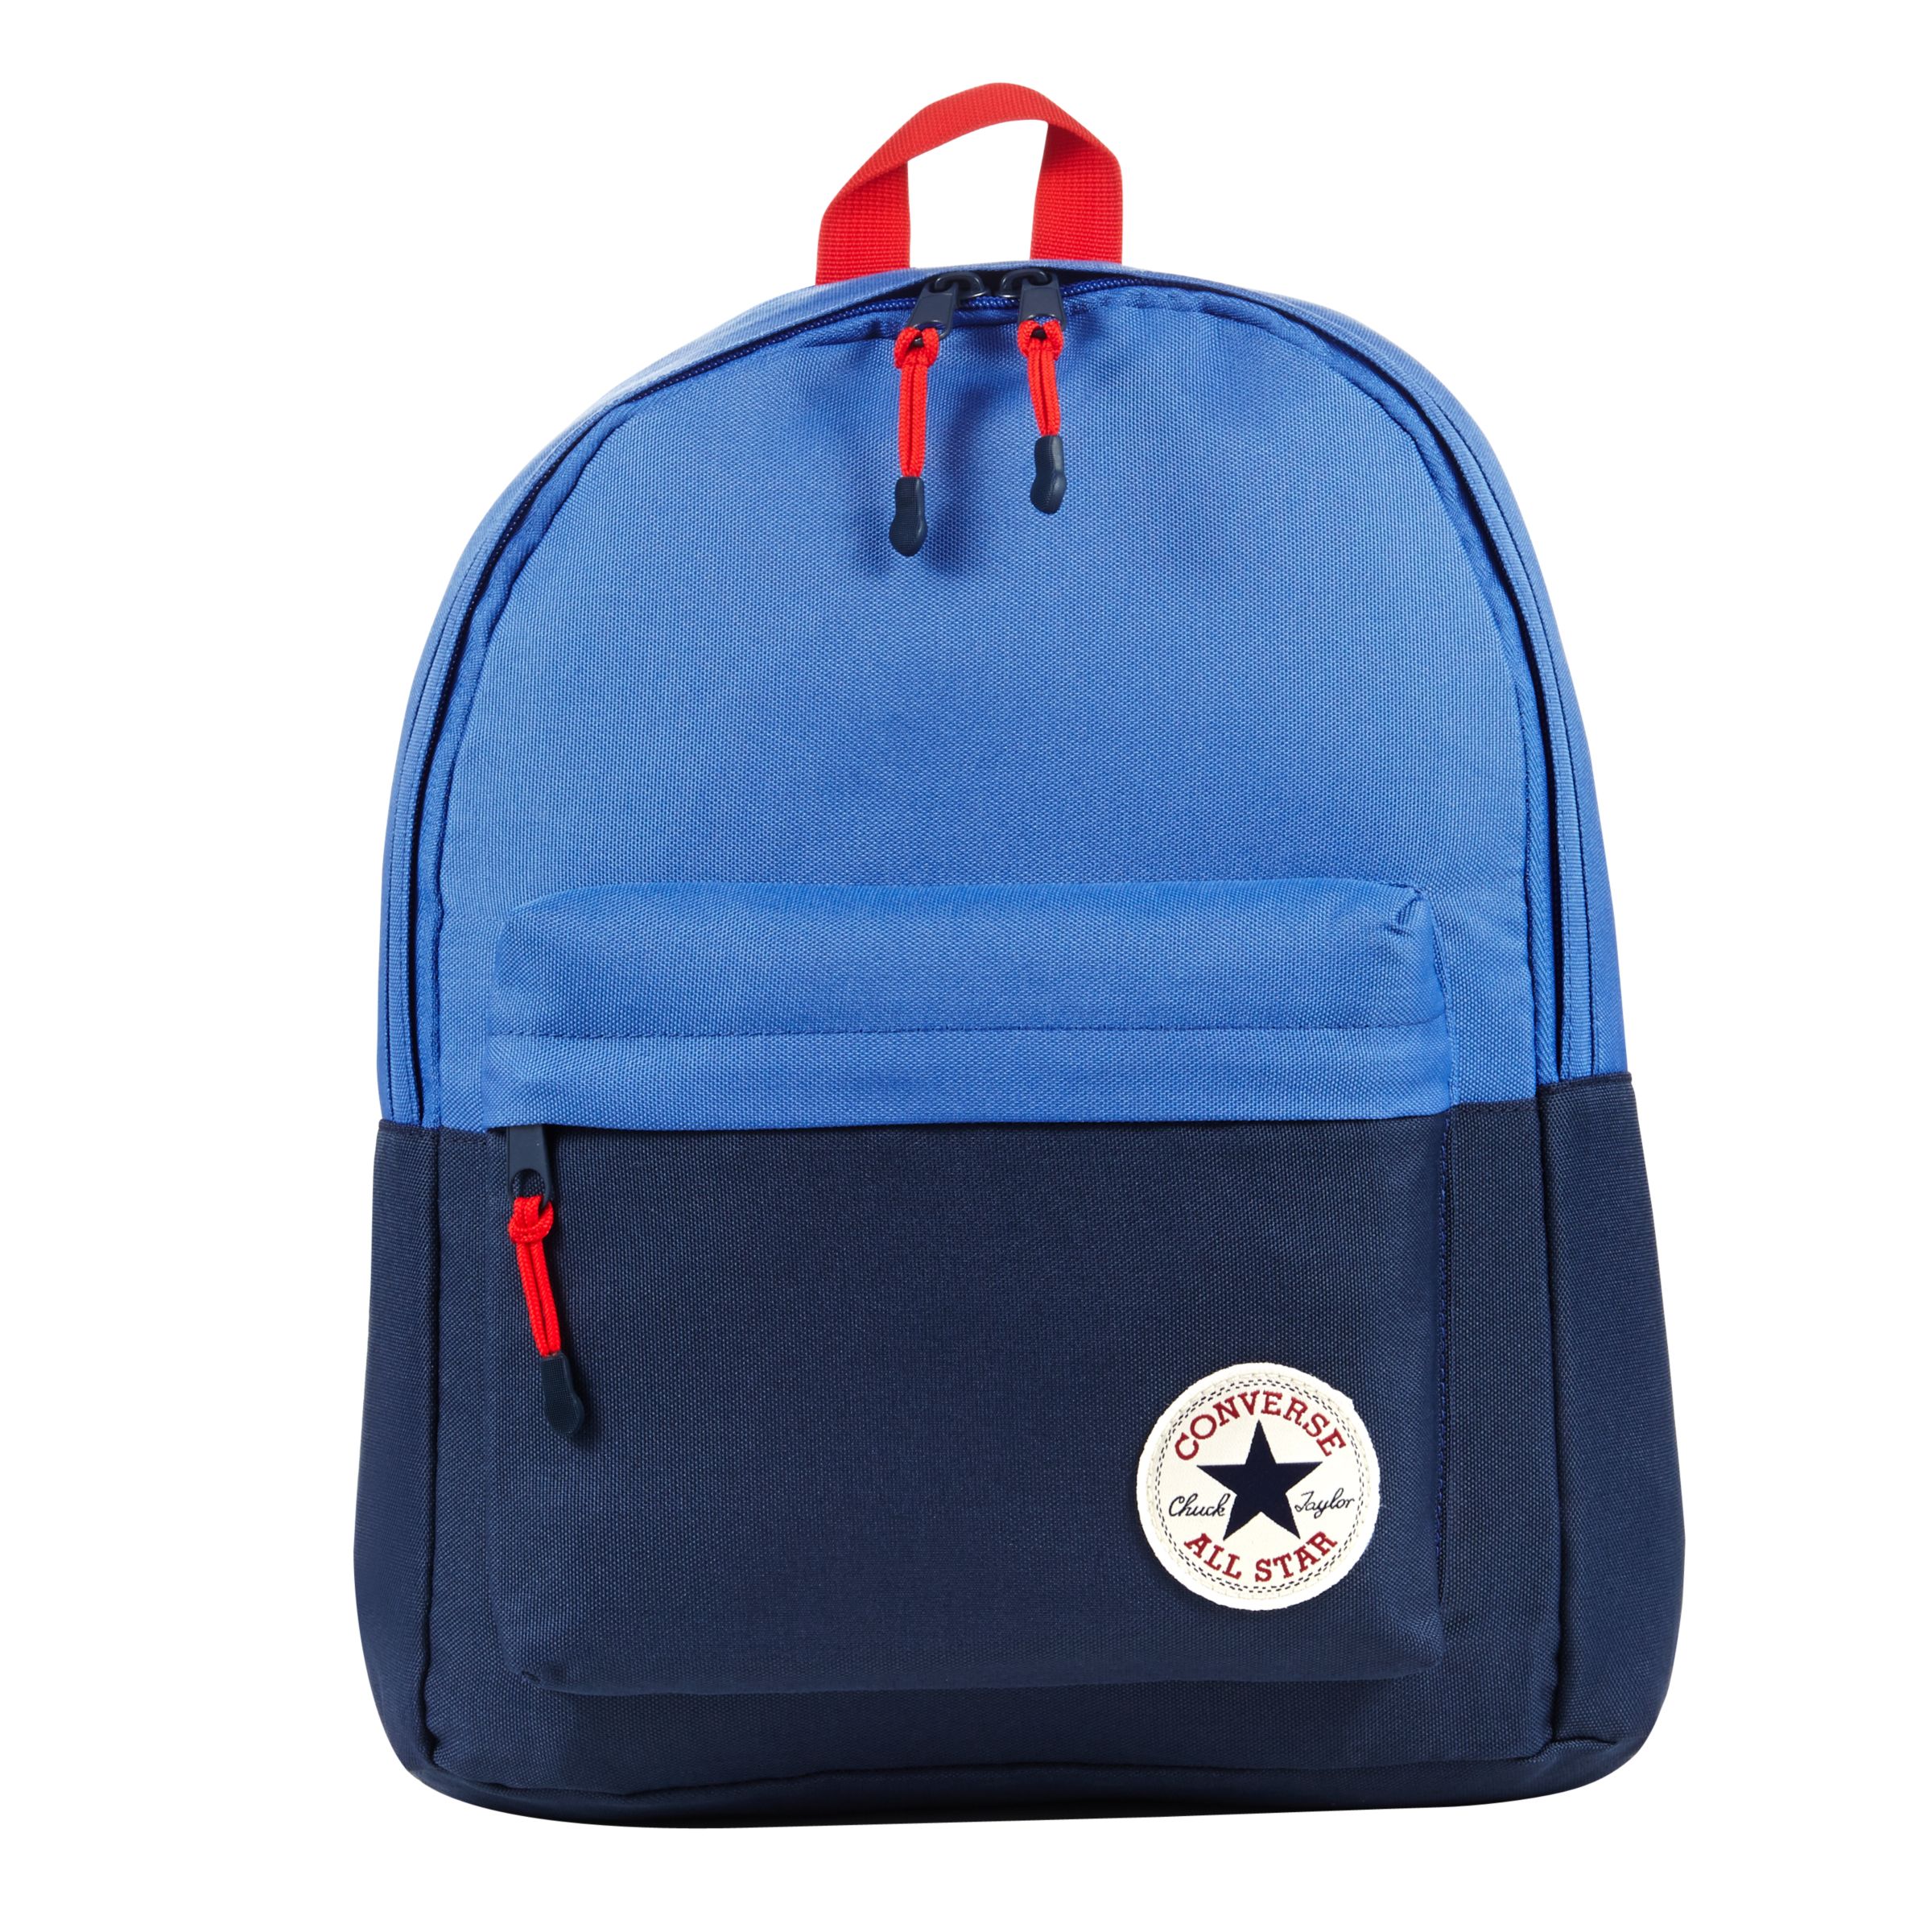 Converse Children's Chuck Taylor All Star Backpack, Blue at John Lewis \u0026  Partners